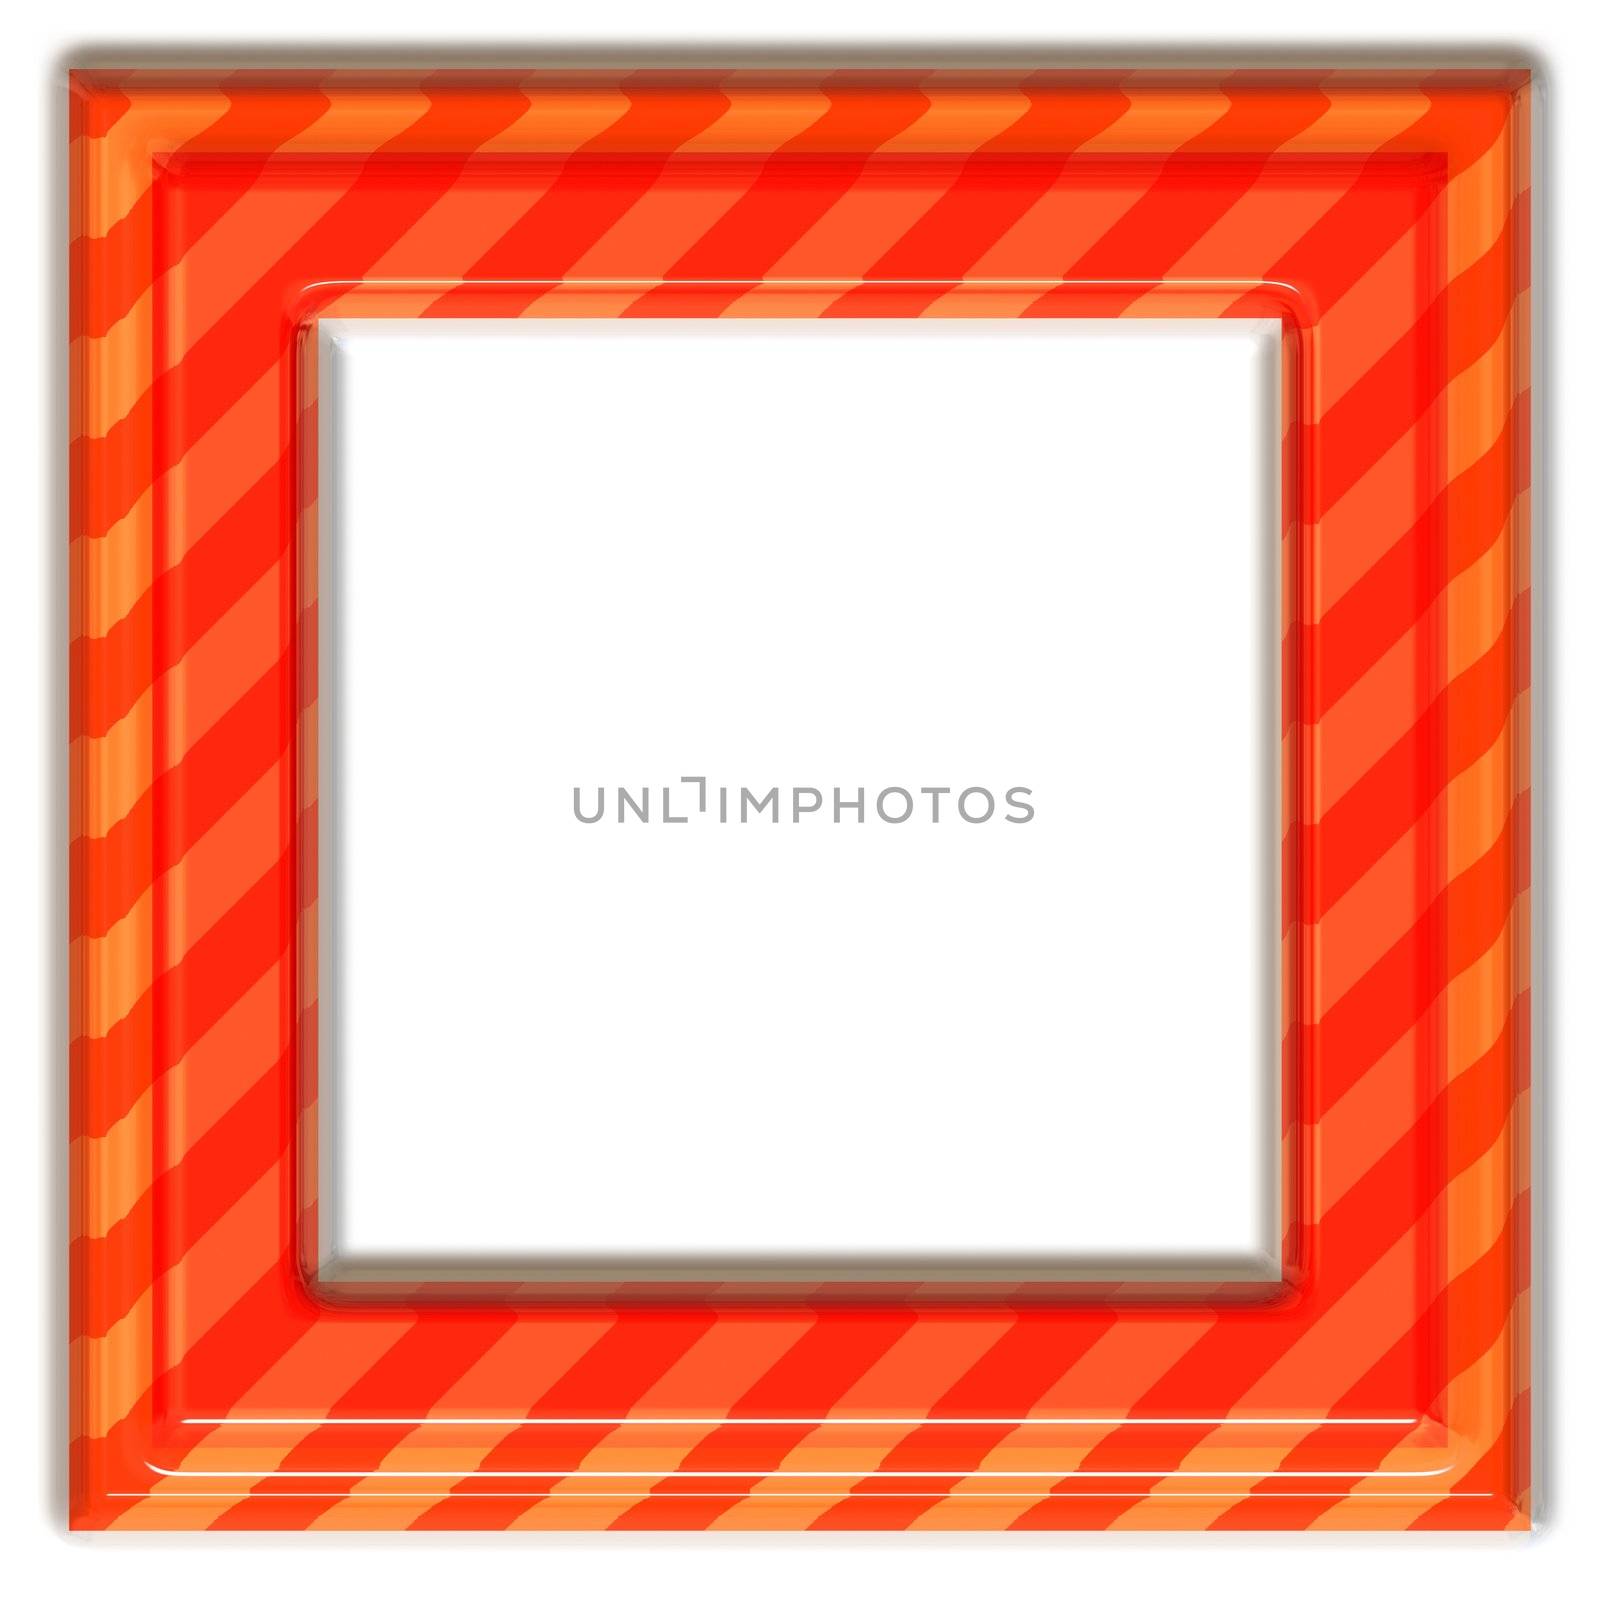 3d texture of glossy orange to red diagonal striped frame